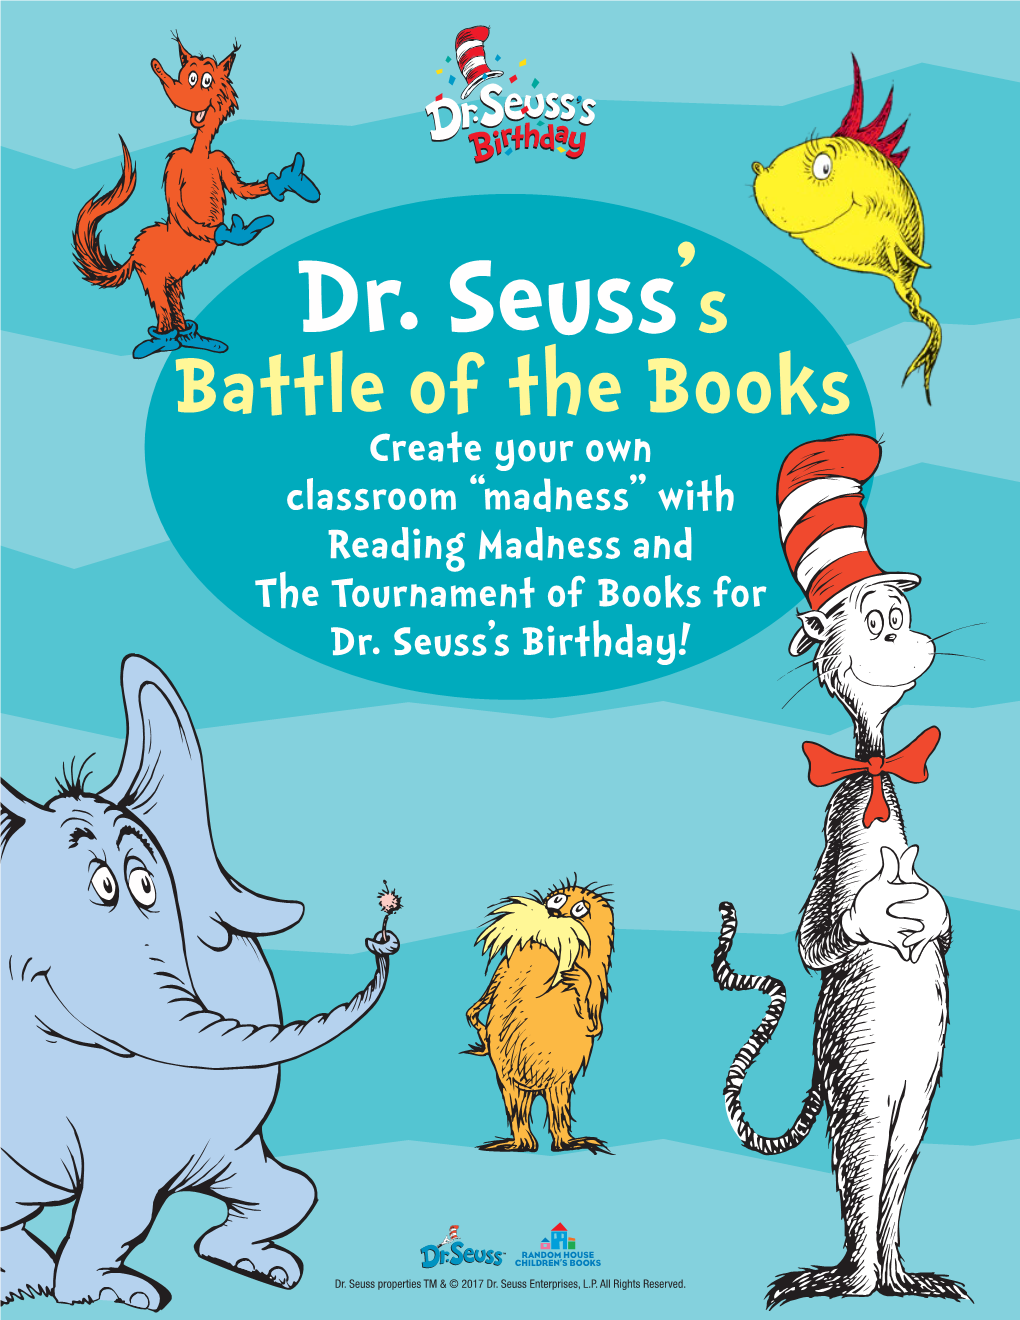 Dr. Seuss's Battle of the Books Create Your Own Classroom ‘‘Madness" with Reading Madness and the Tournament of Books for Dr